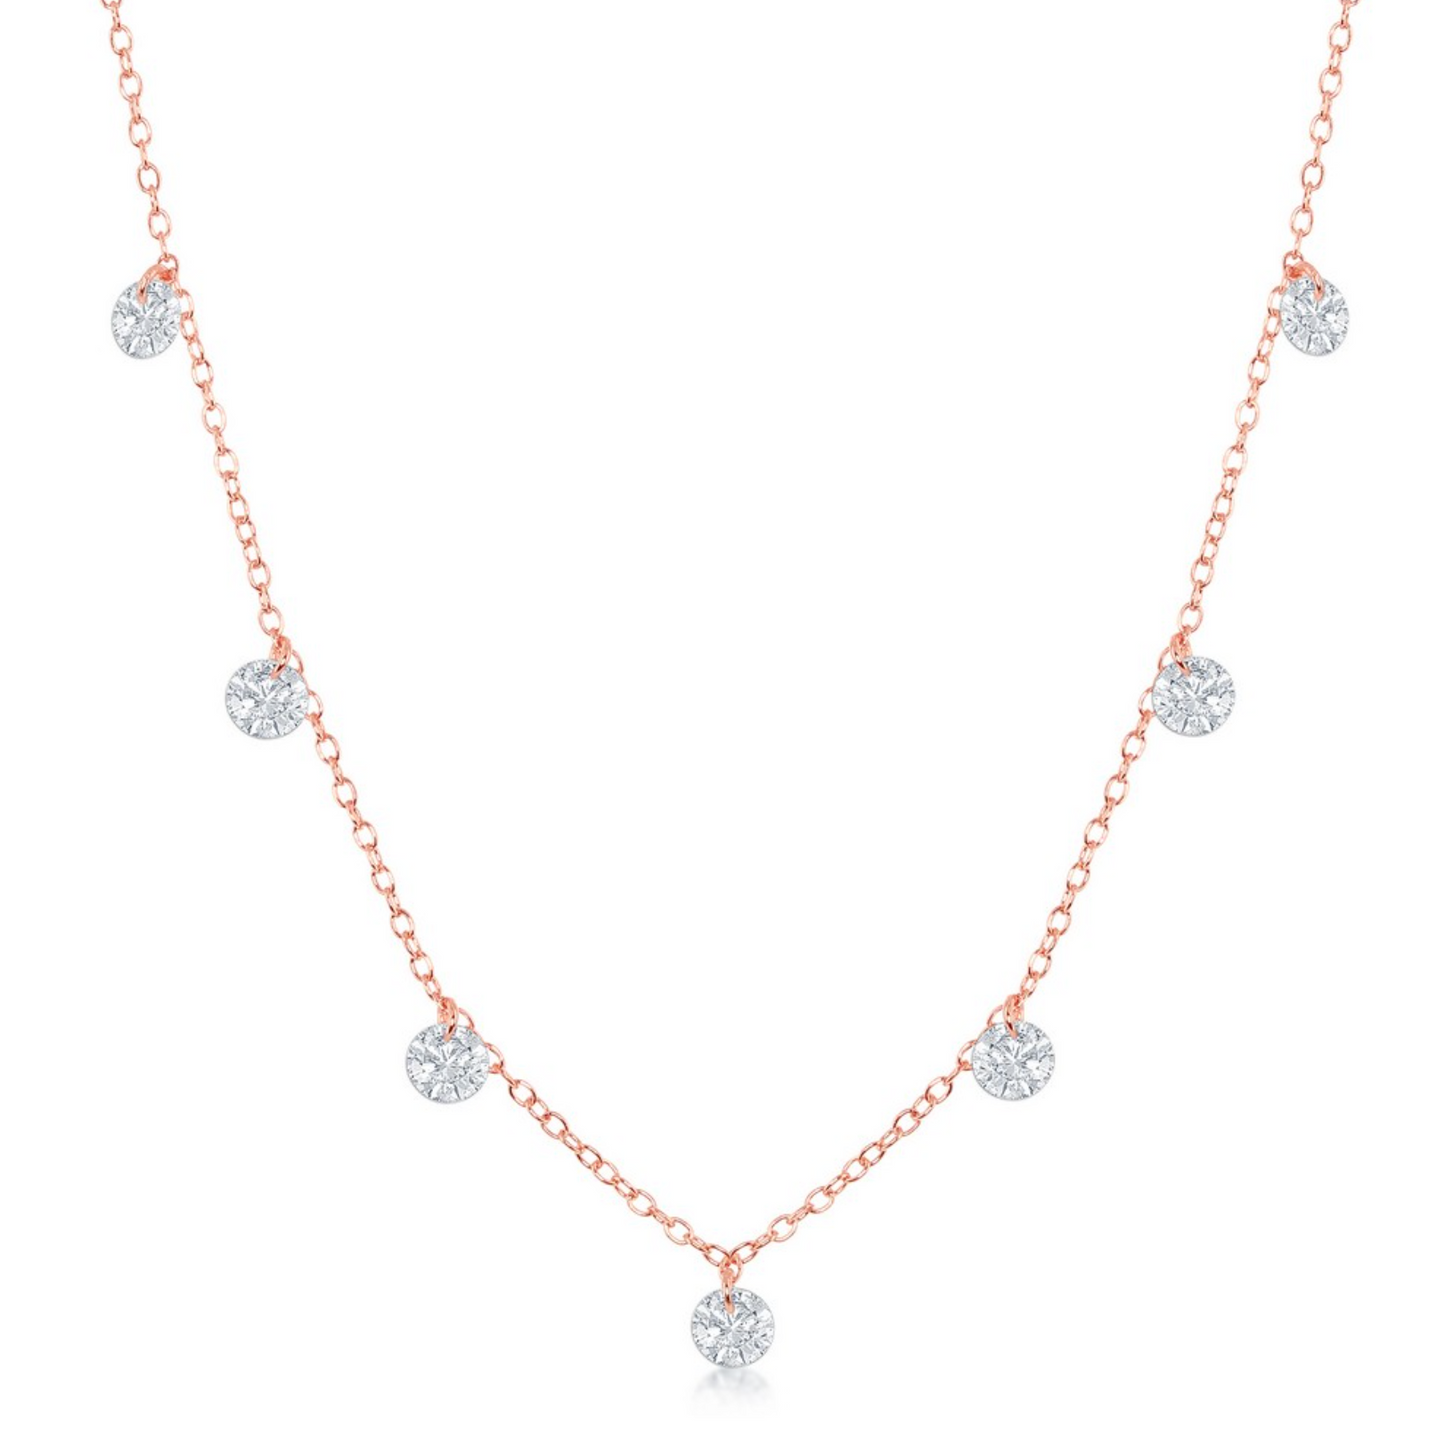 Sterling Silver with Hanging CZ's Necklace